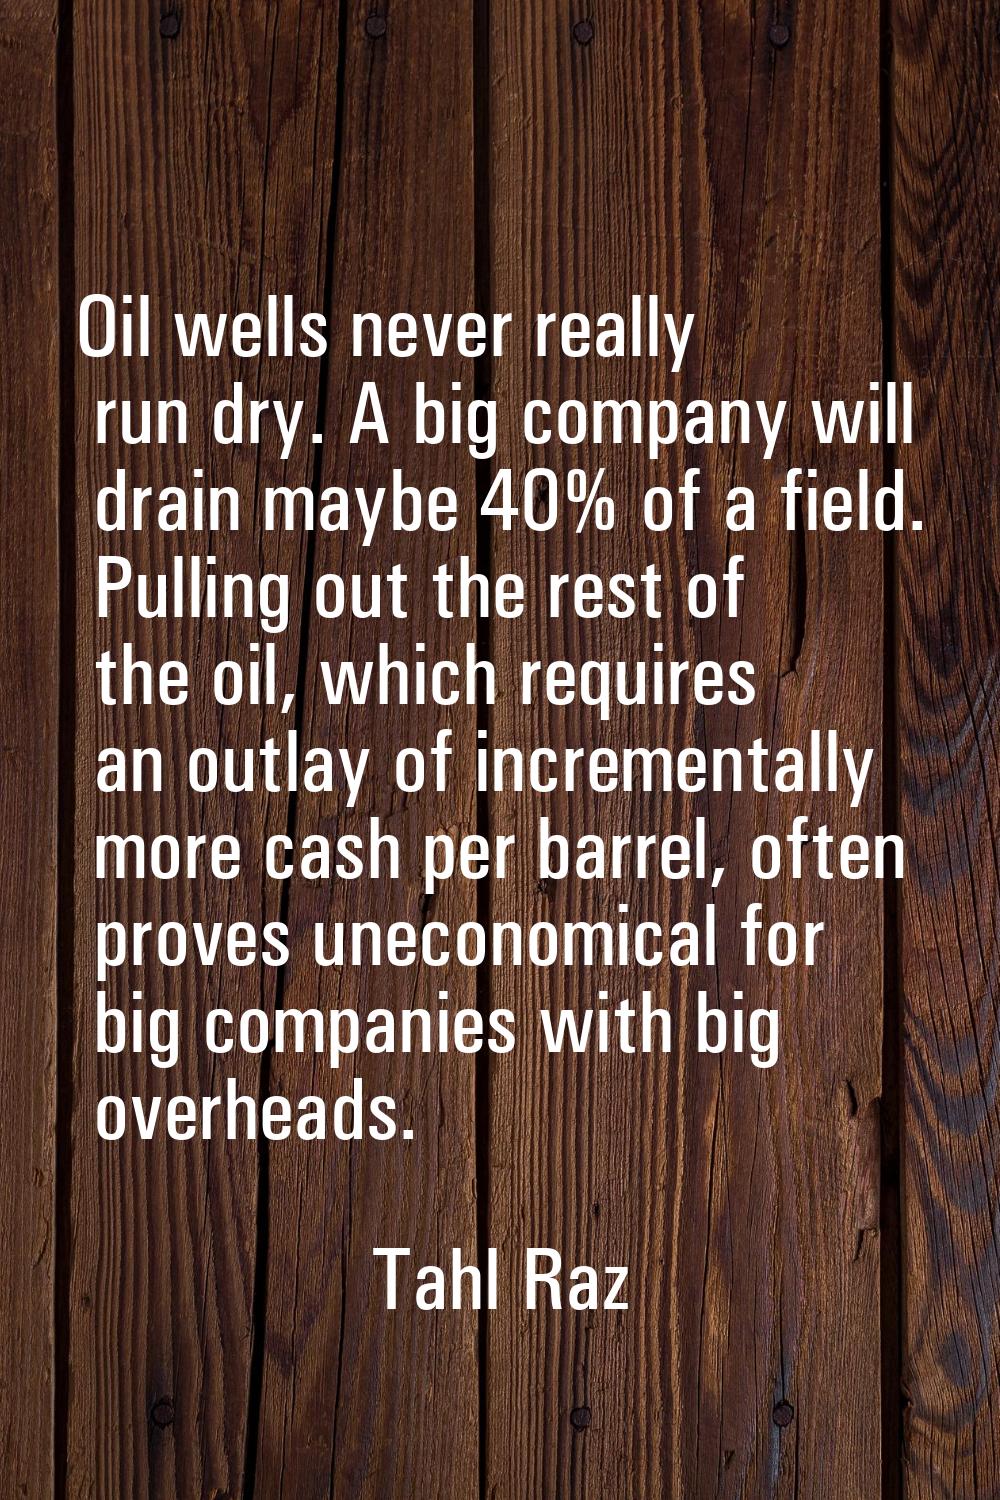 Oil wells never really run dry. A big company will drain maybe 40% of a field. Pulling out the rest